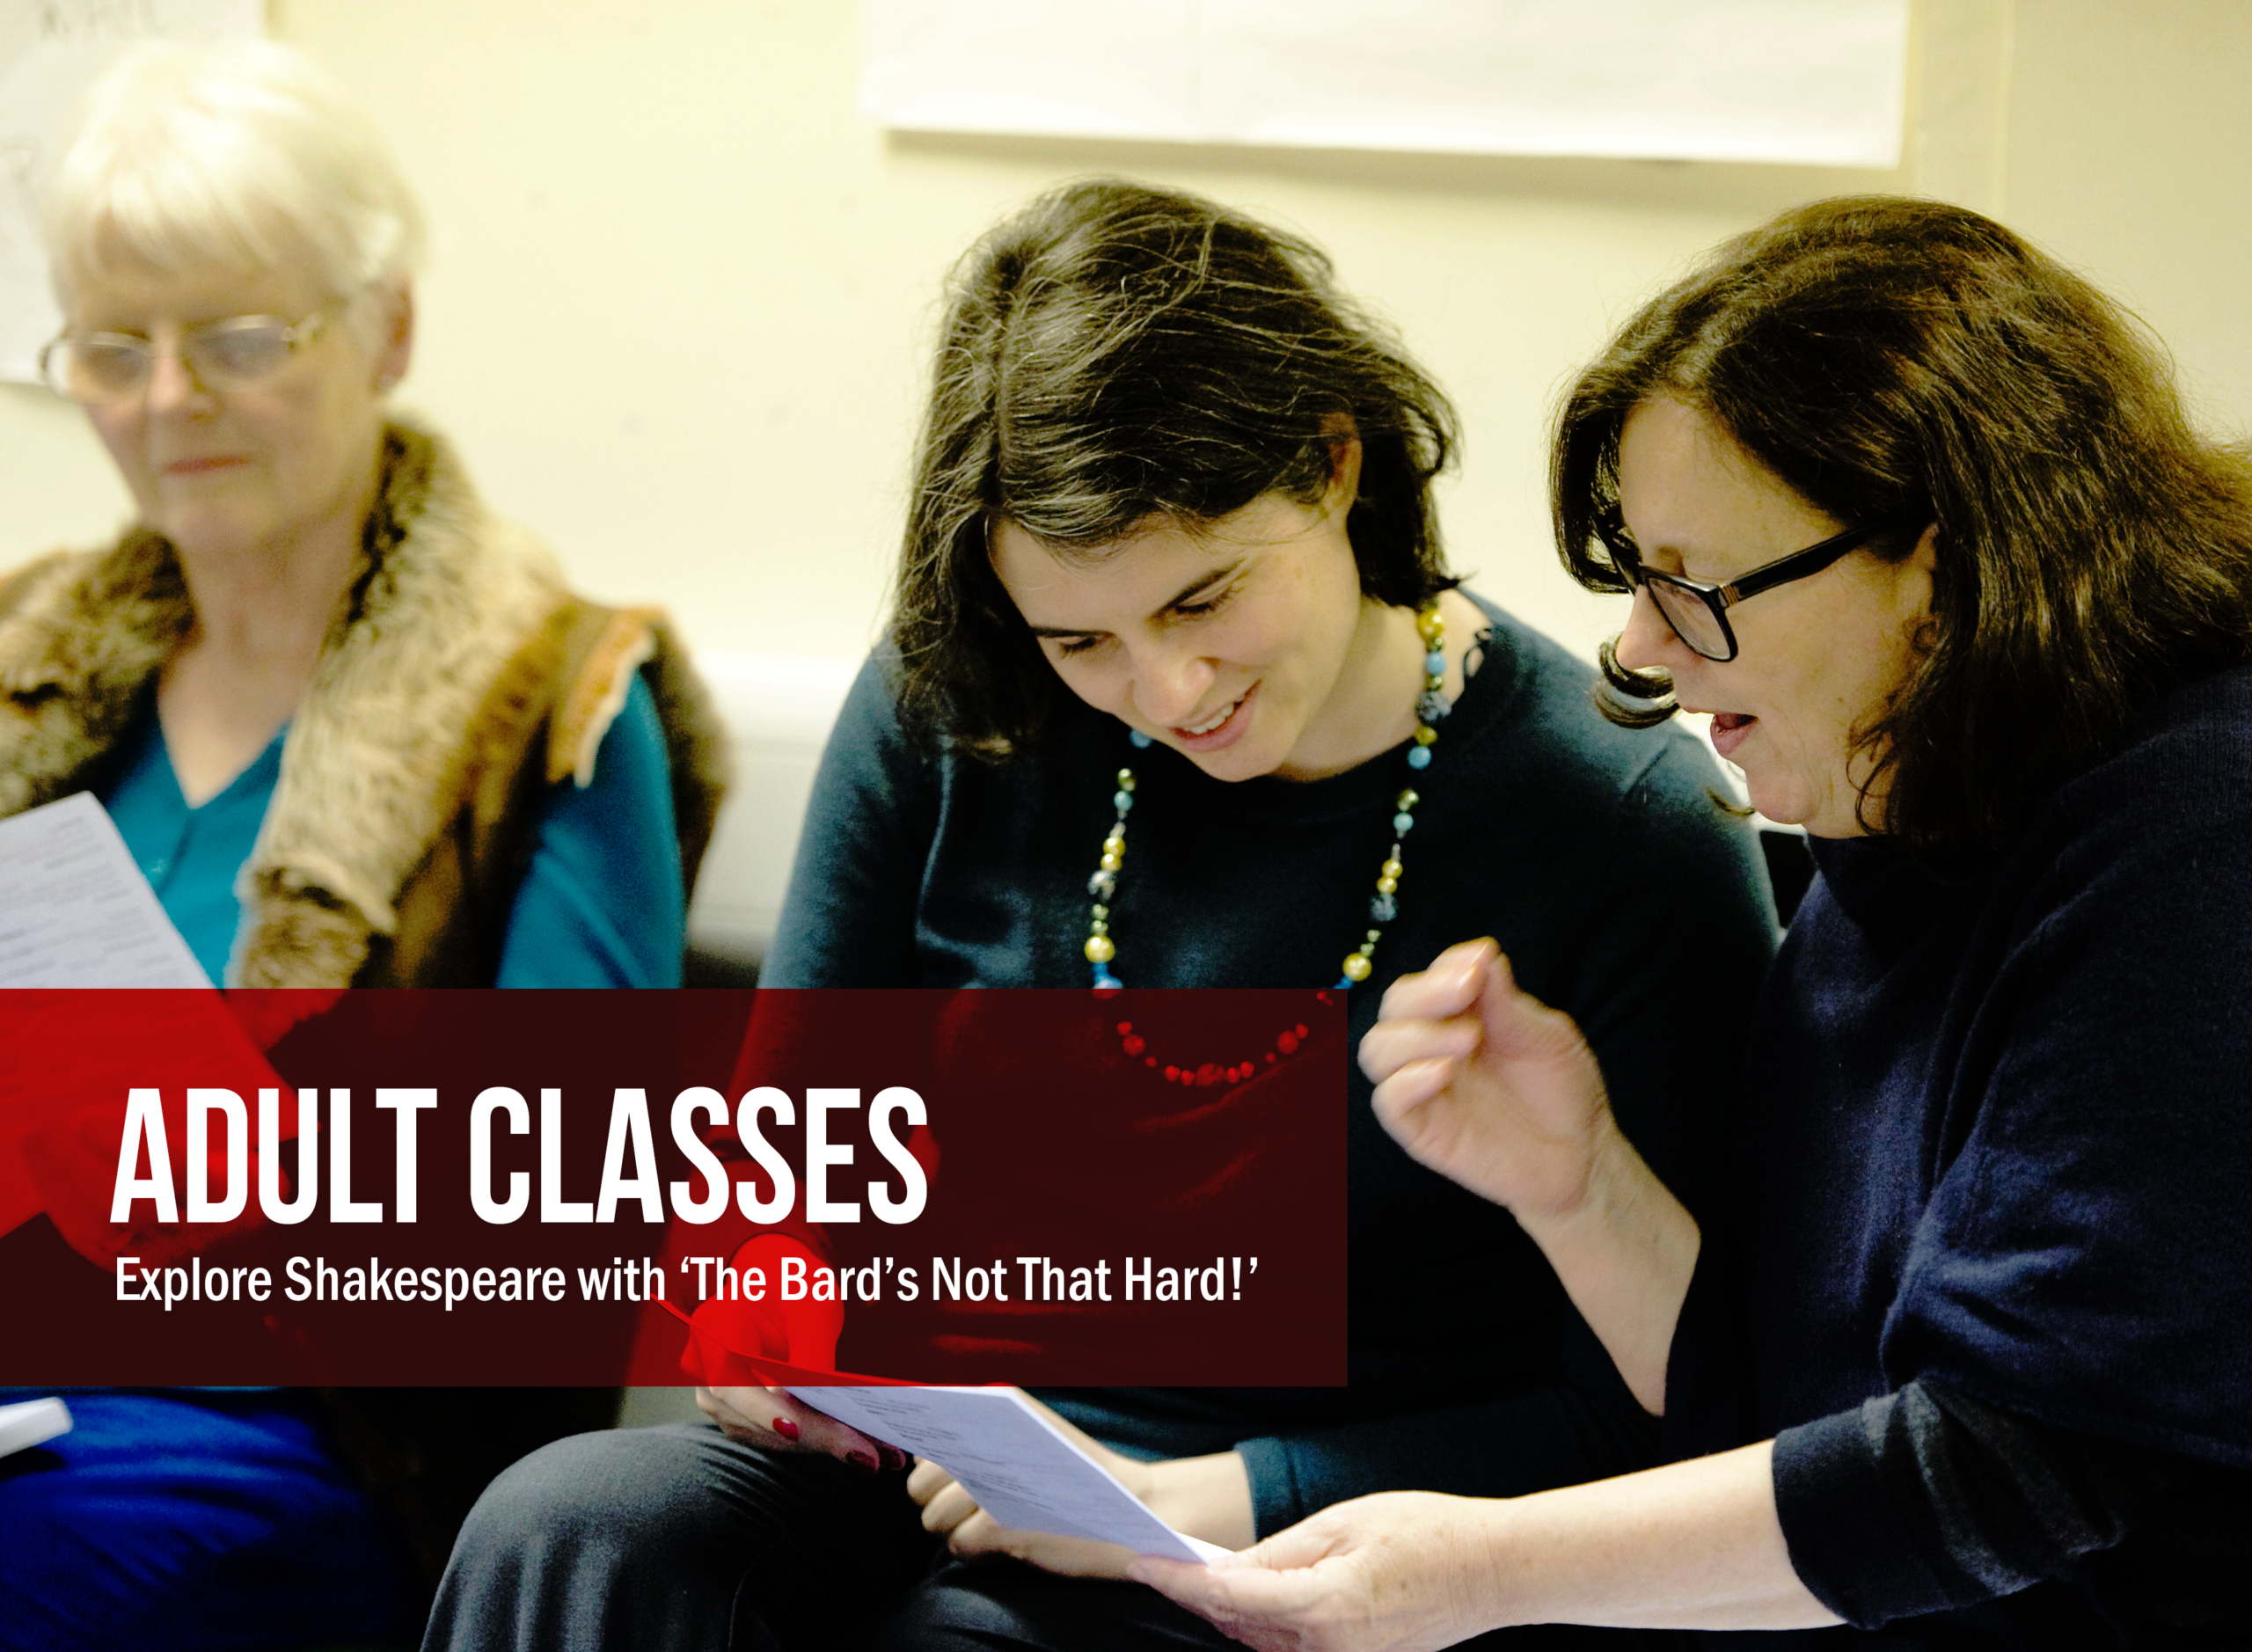 Image shows participants from our adult class, 'The Bard's Not That Hard', reading a script